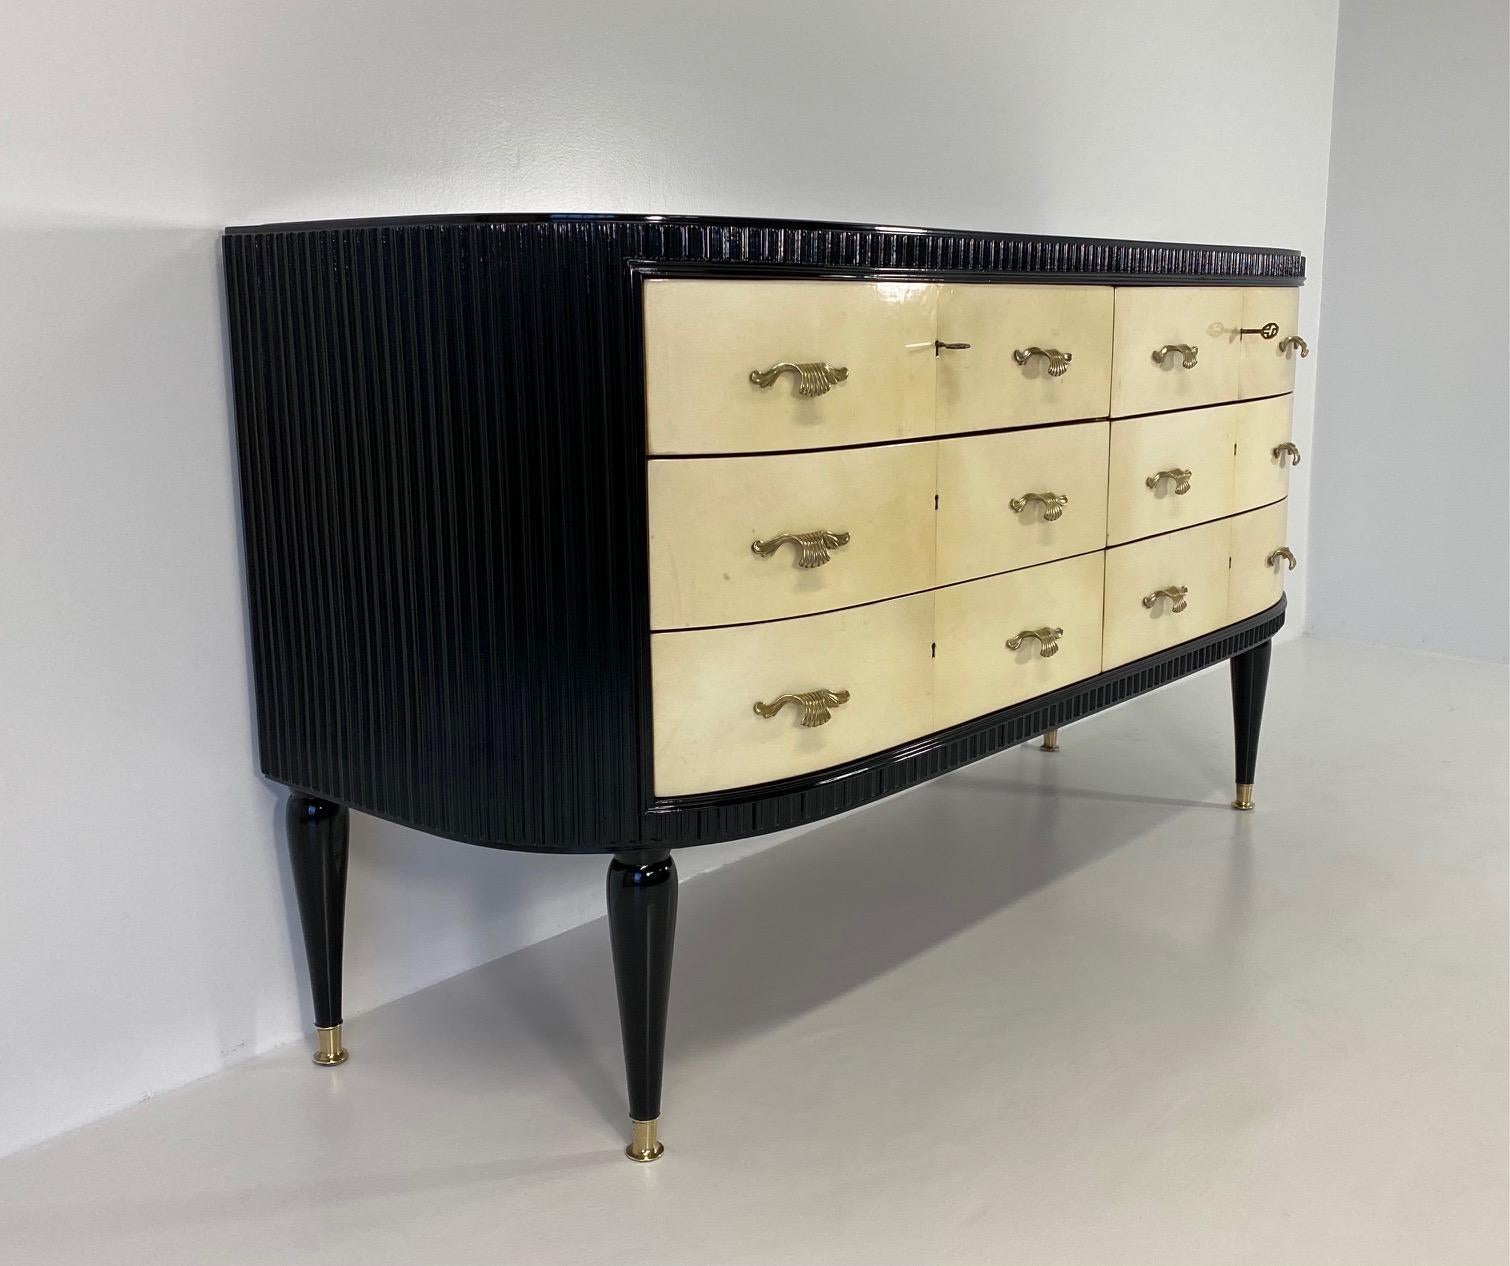 This elegant Art Deco dresser was produced in Italy, more precisely in Cantù, which is a small city in the north of Italy that used to be famous in the Art Deco era for wood crafting and furniture making. it was produced in the 1940s, most likely